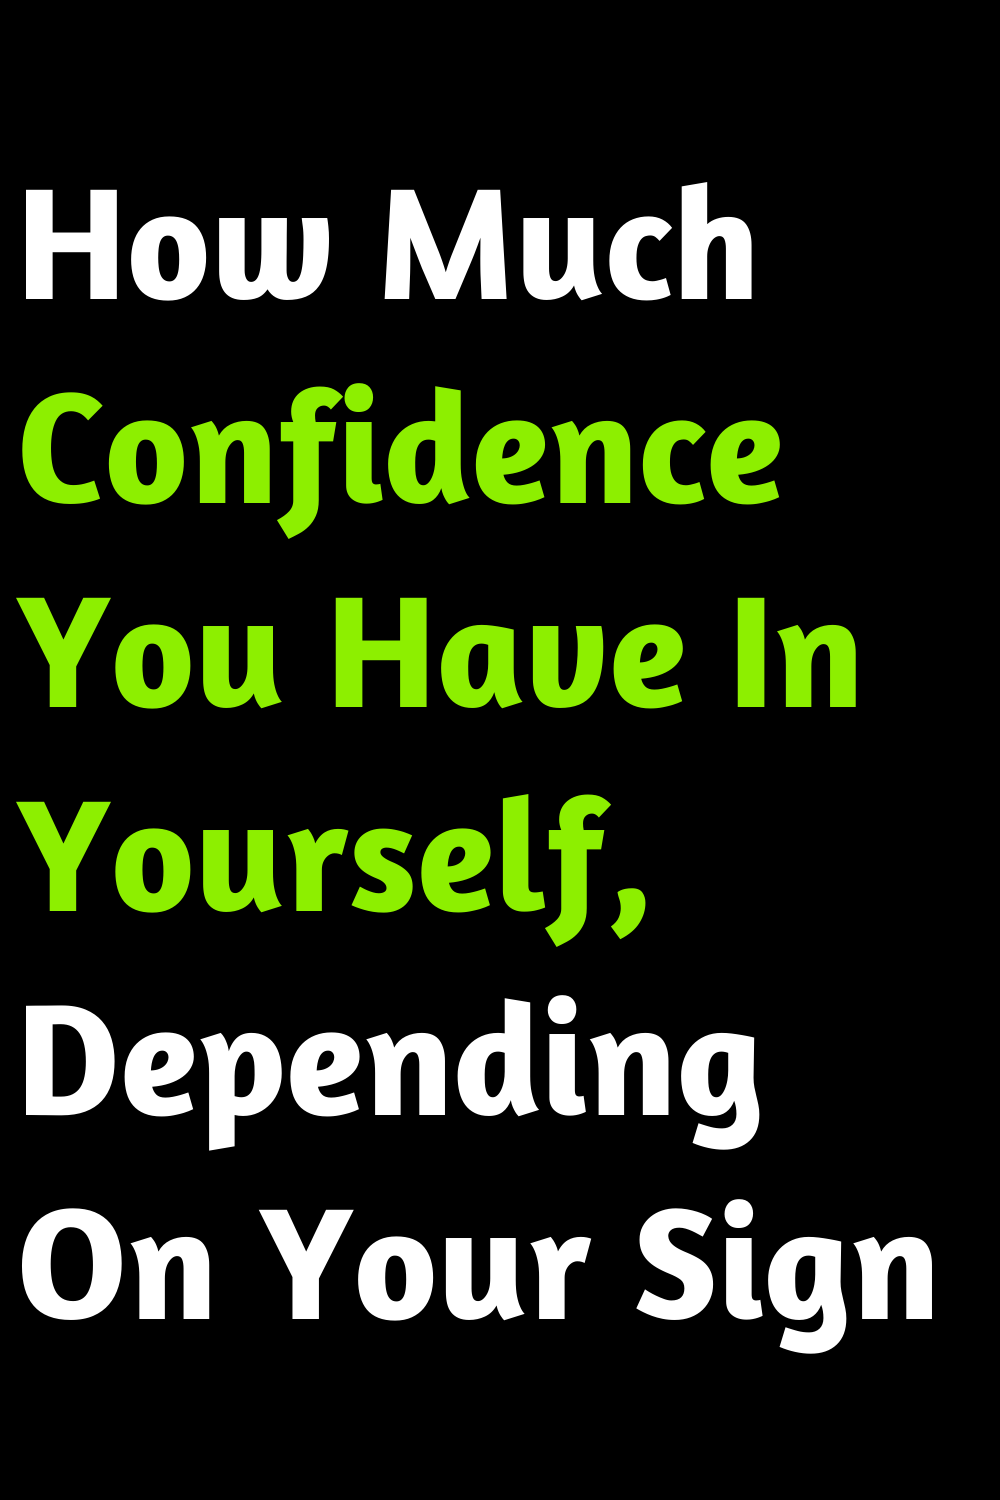 How Much Confidence You Have In Yourself, Depending On Your Sign